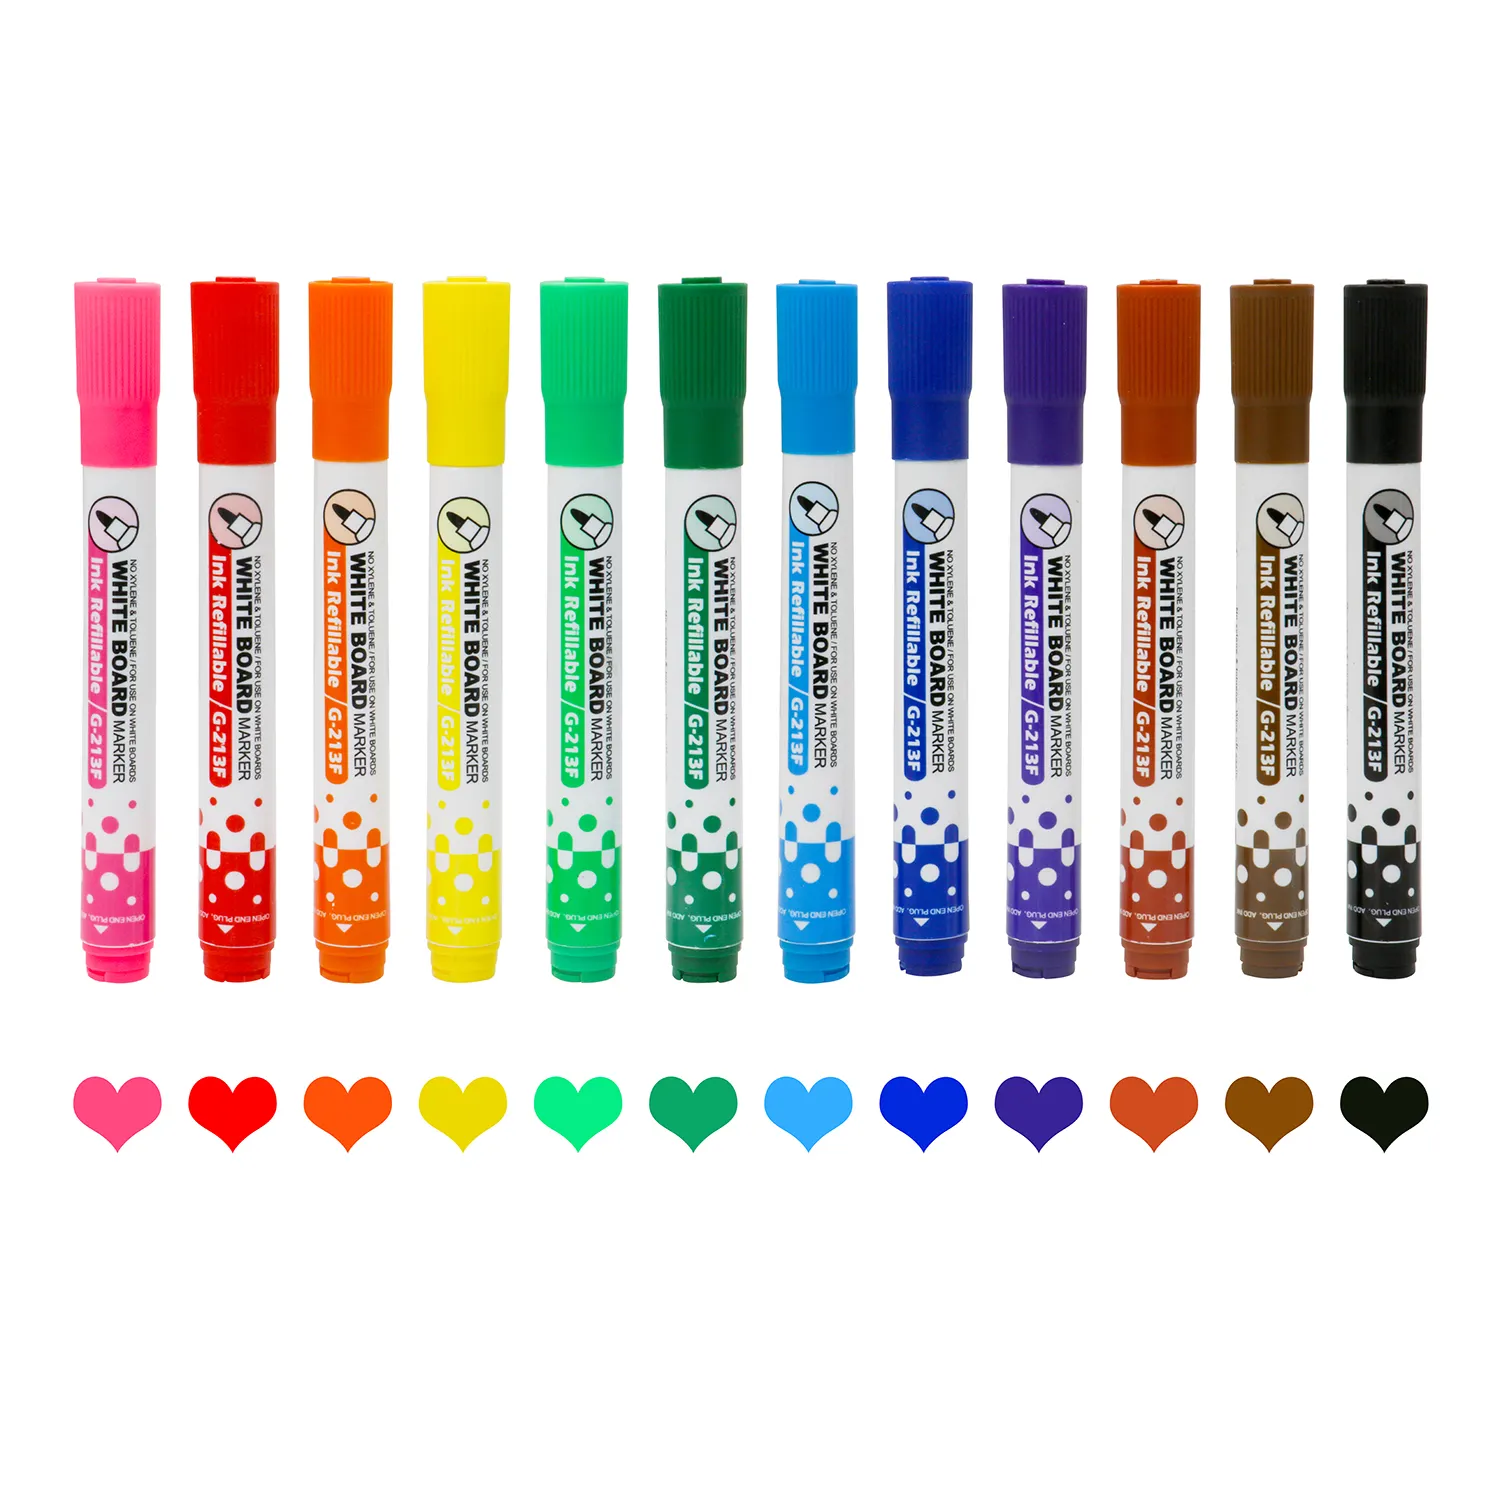 Dry Erase Markers Pen Low Odor 1-2mm Fine Point Can Add Ink Whiteboard Markers with Eraser